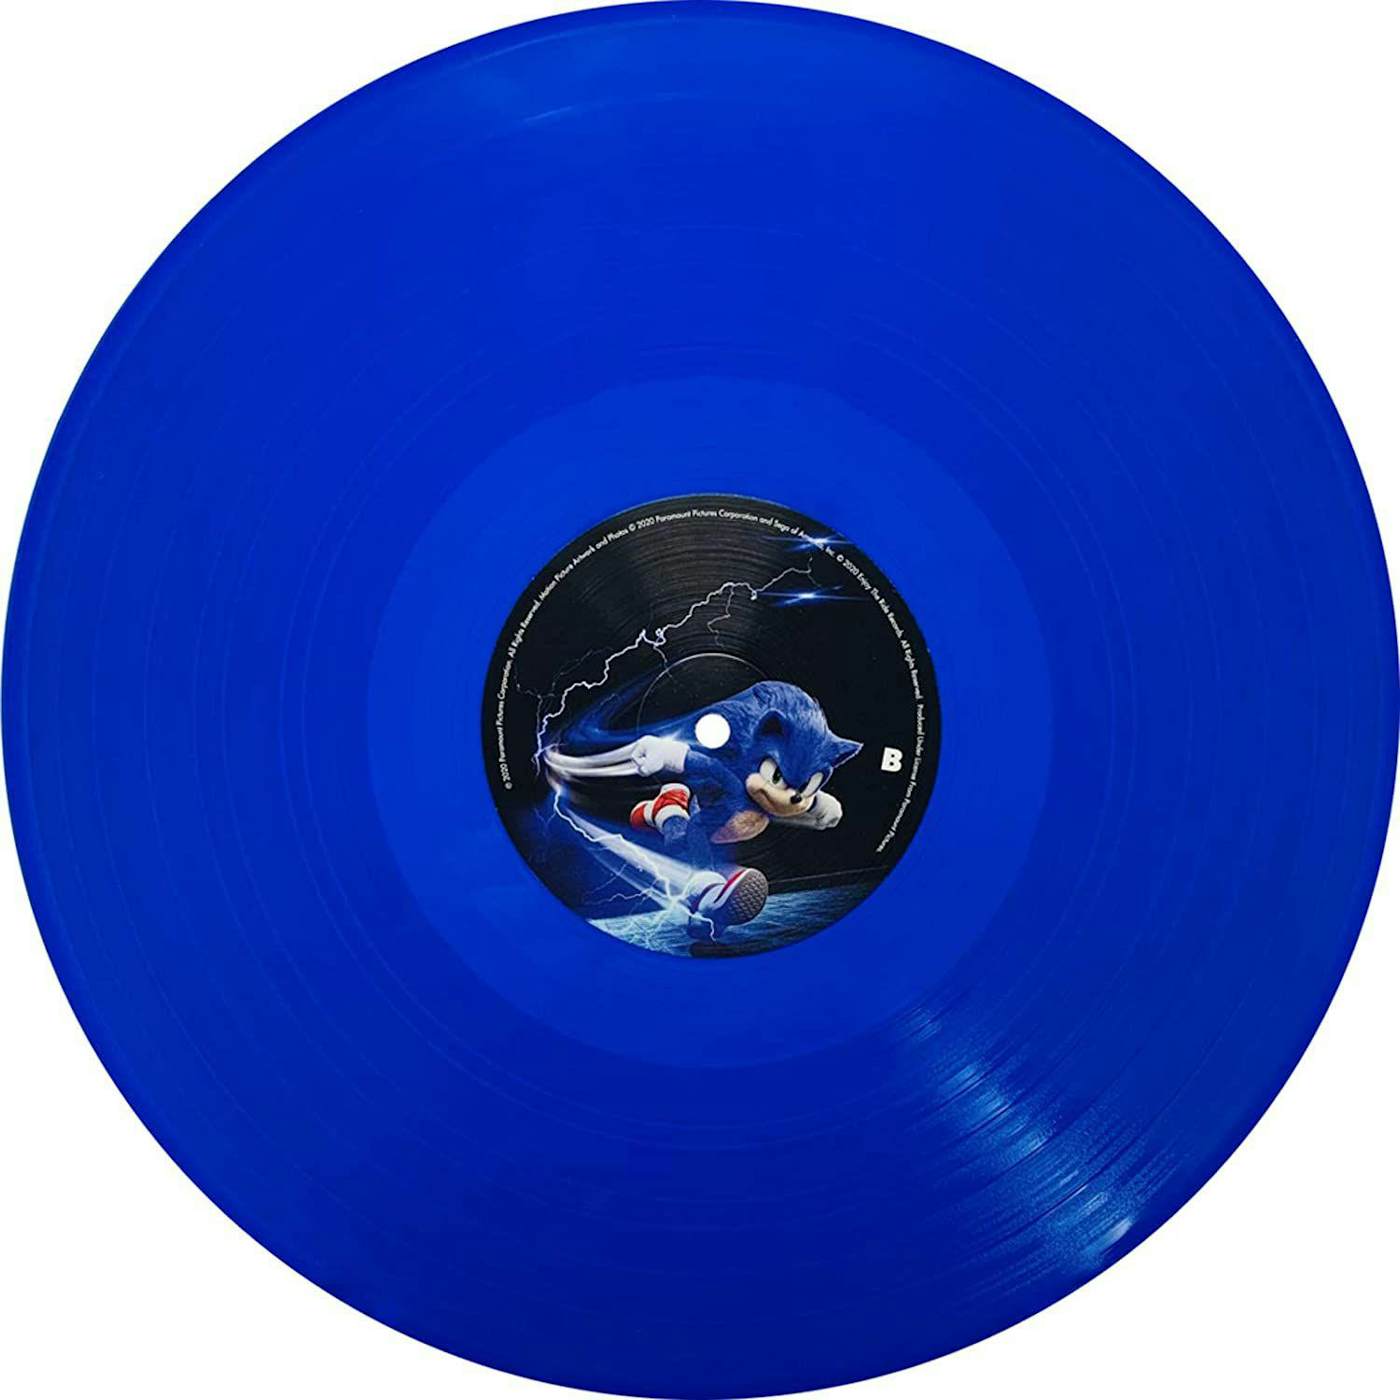 Junkie XL SONIC THE HEDGEHOG: MUSIC FROM THE MOTION PICTURE (BLUE VINYL) Vinyl Record